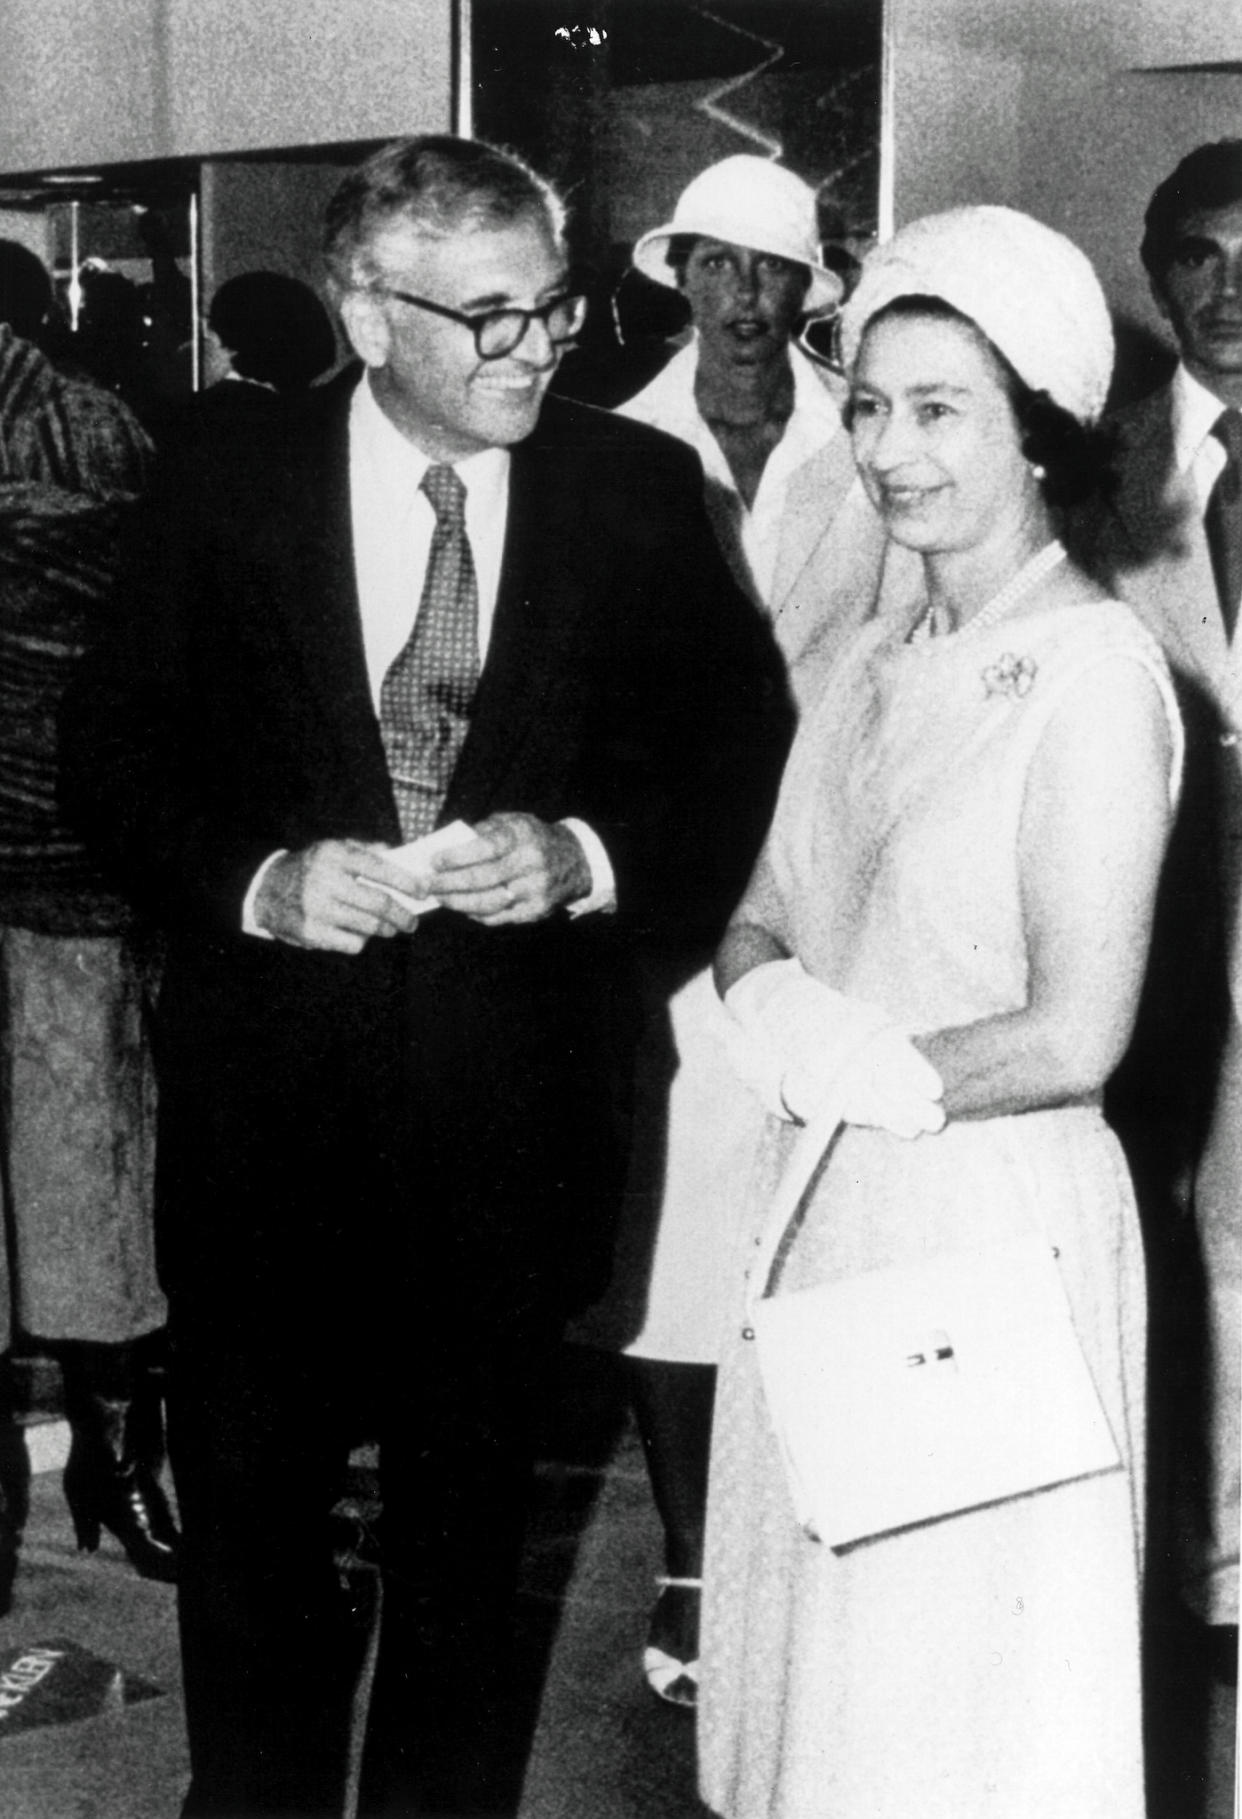 Marvin Traub with Queen Elizabeth II during her visit to Bloomingdales in 1976. Designers Donna Karan and Louis Dell Olio stand in the background.